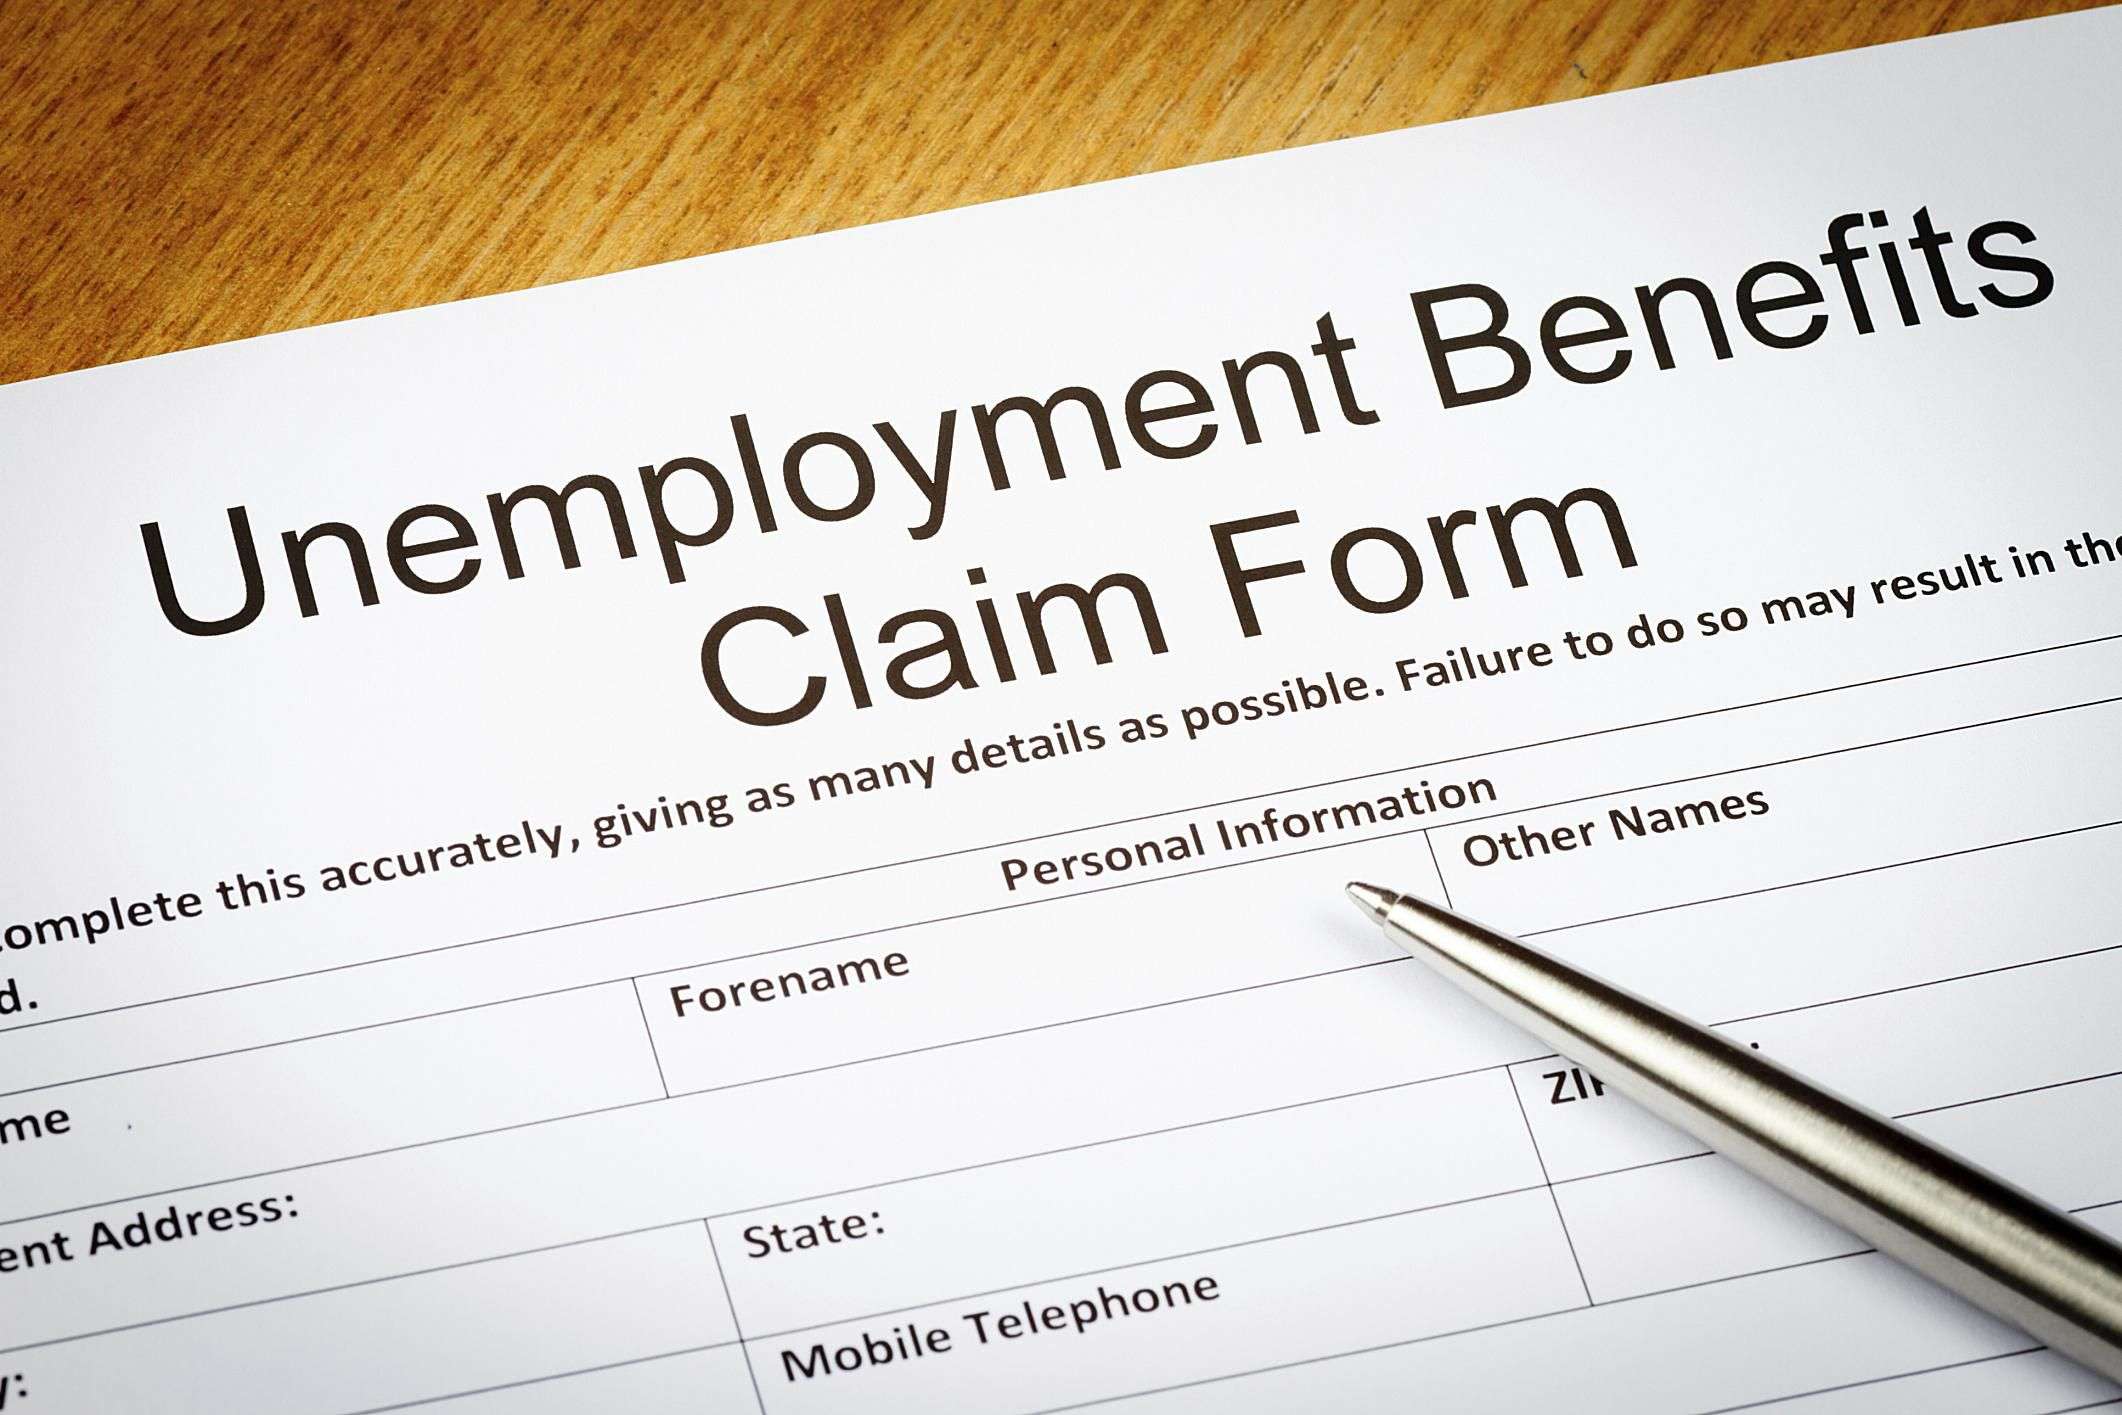 Guide to Claiming Unemployment Benefits